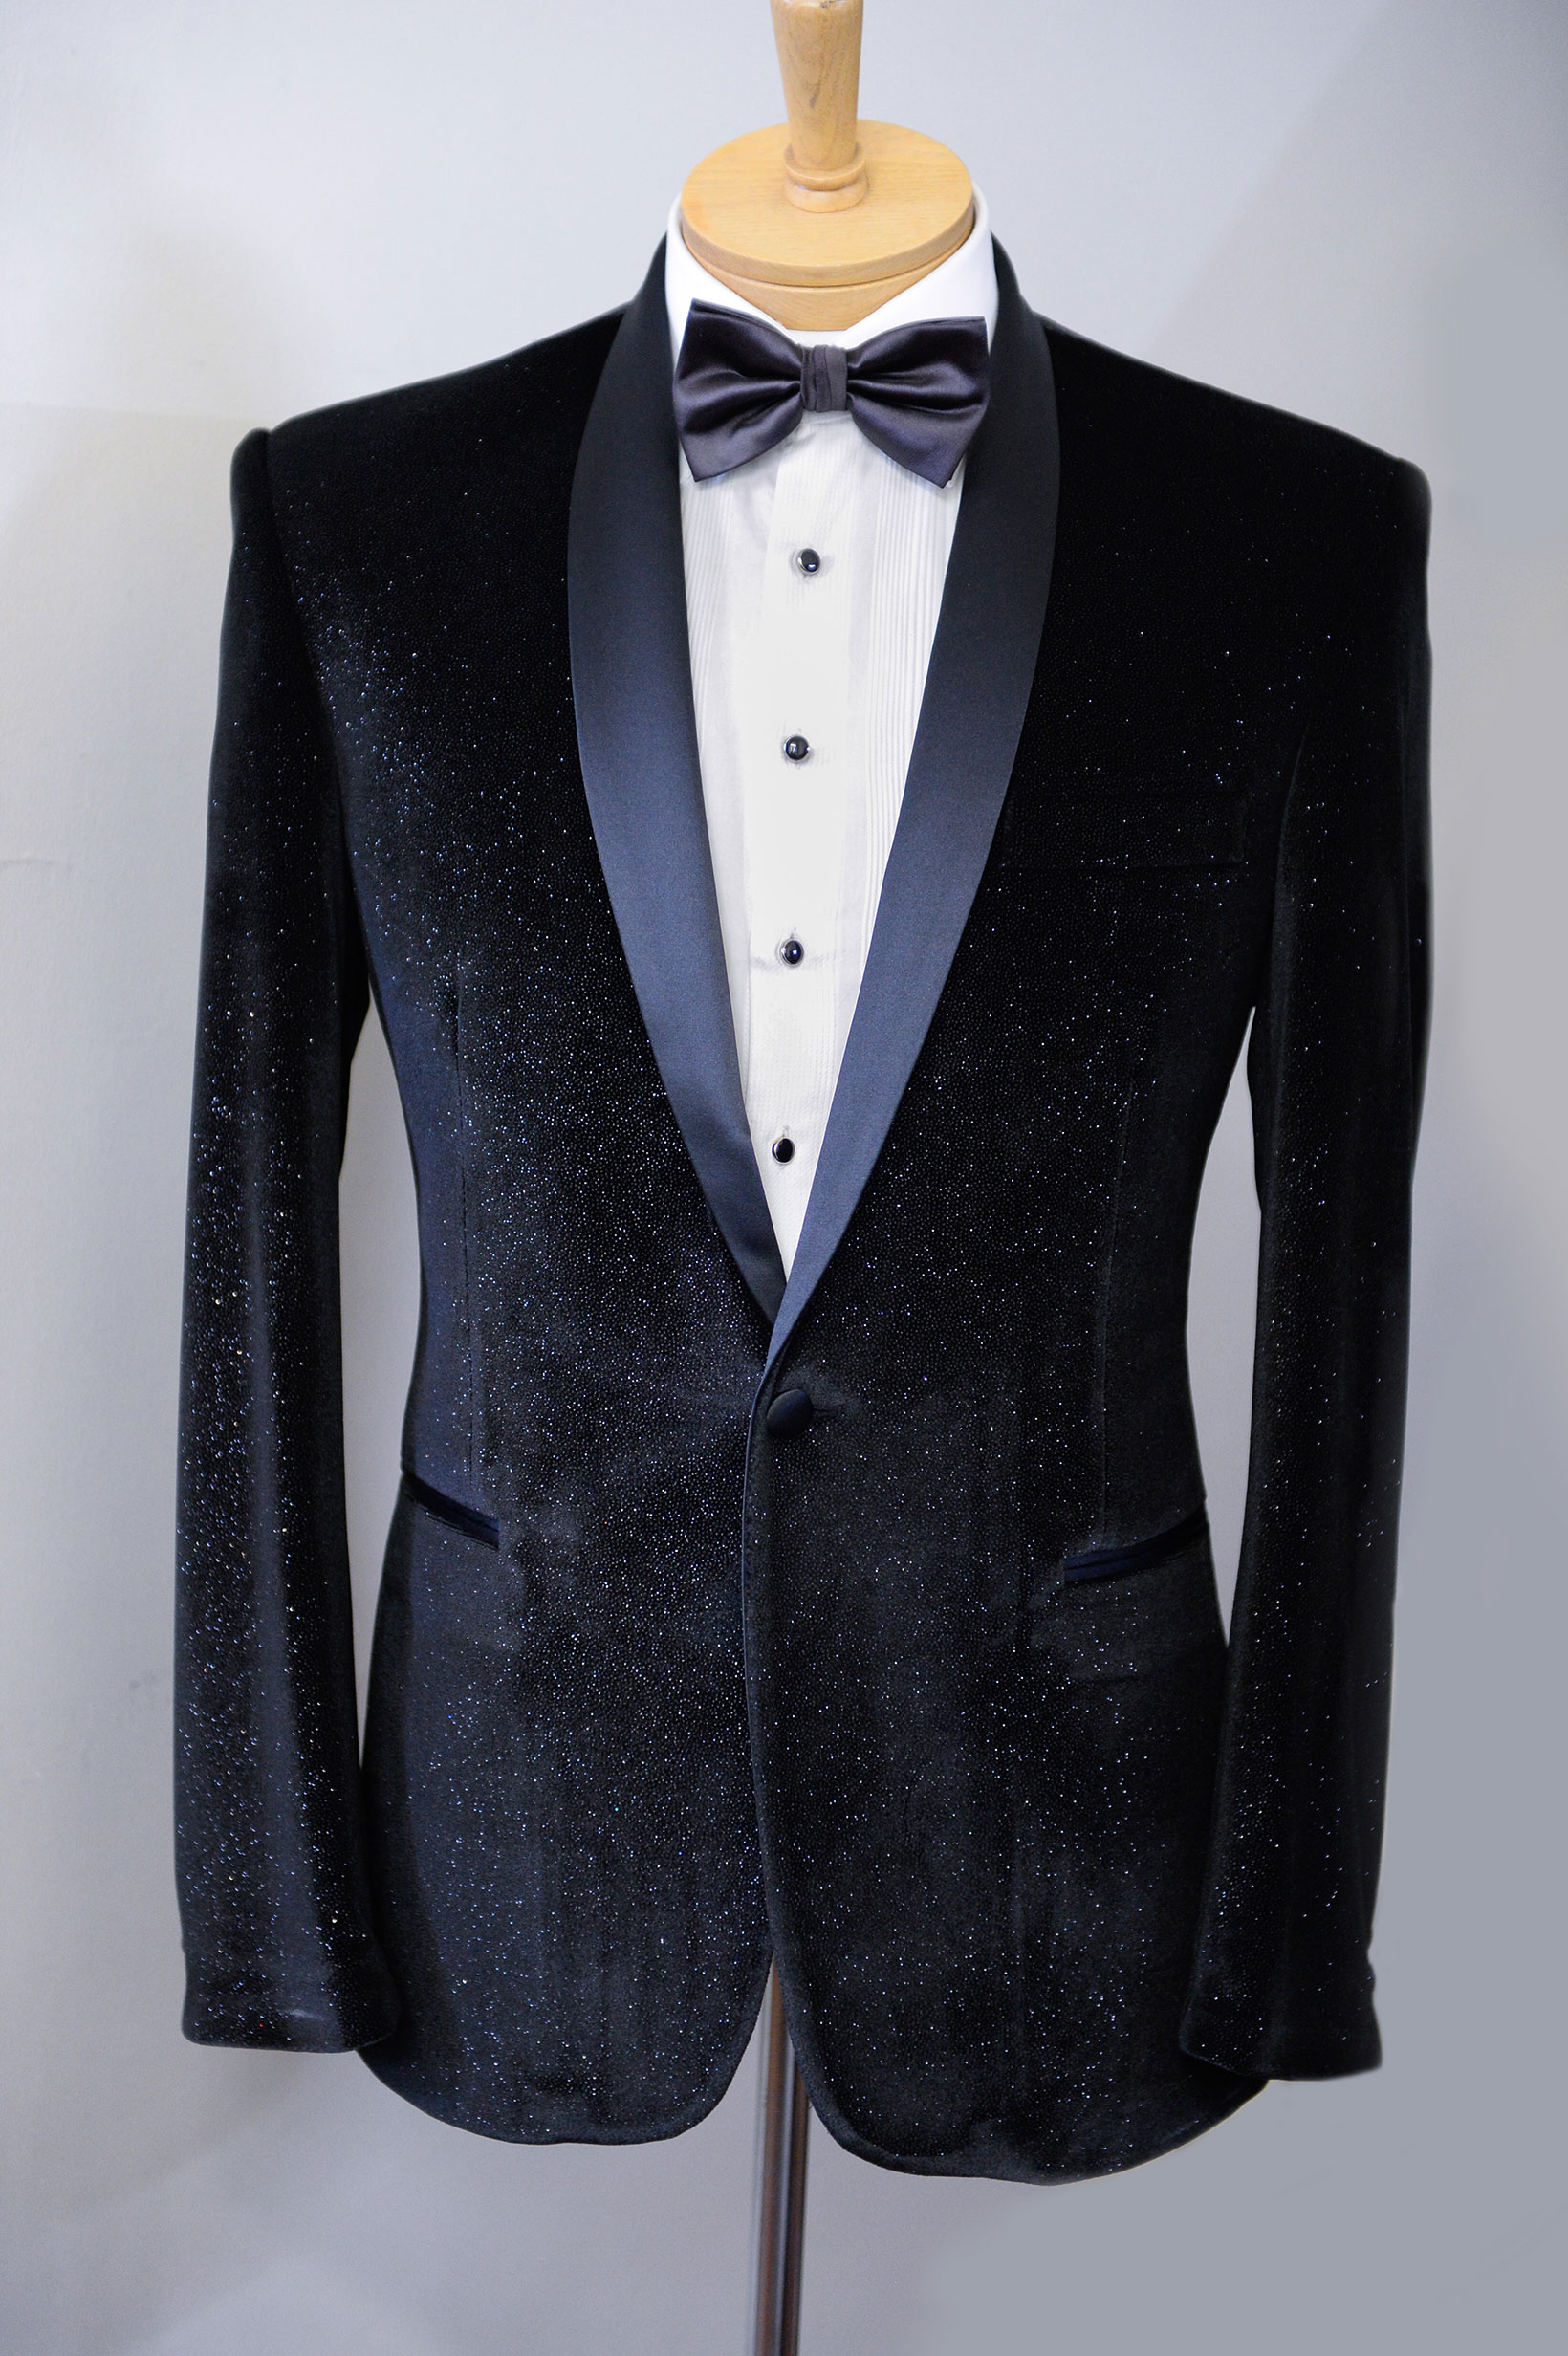 Bespoke / Tailored Suits